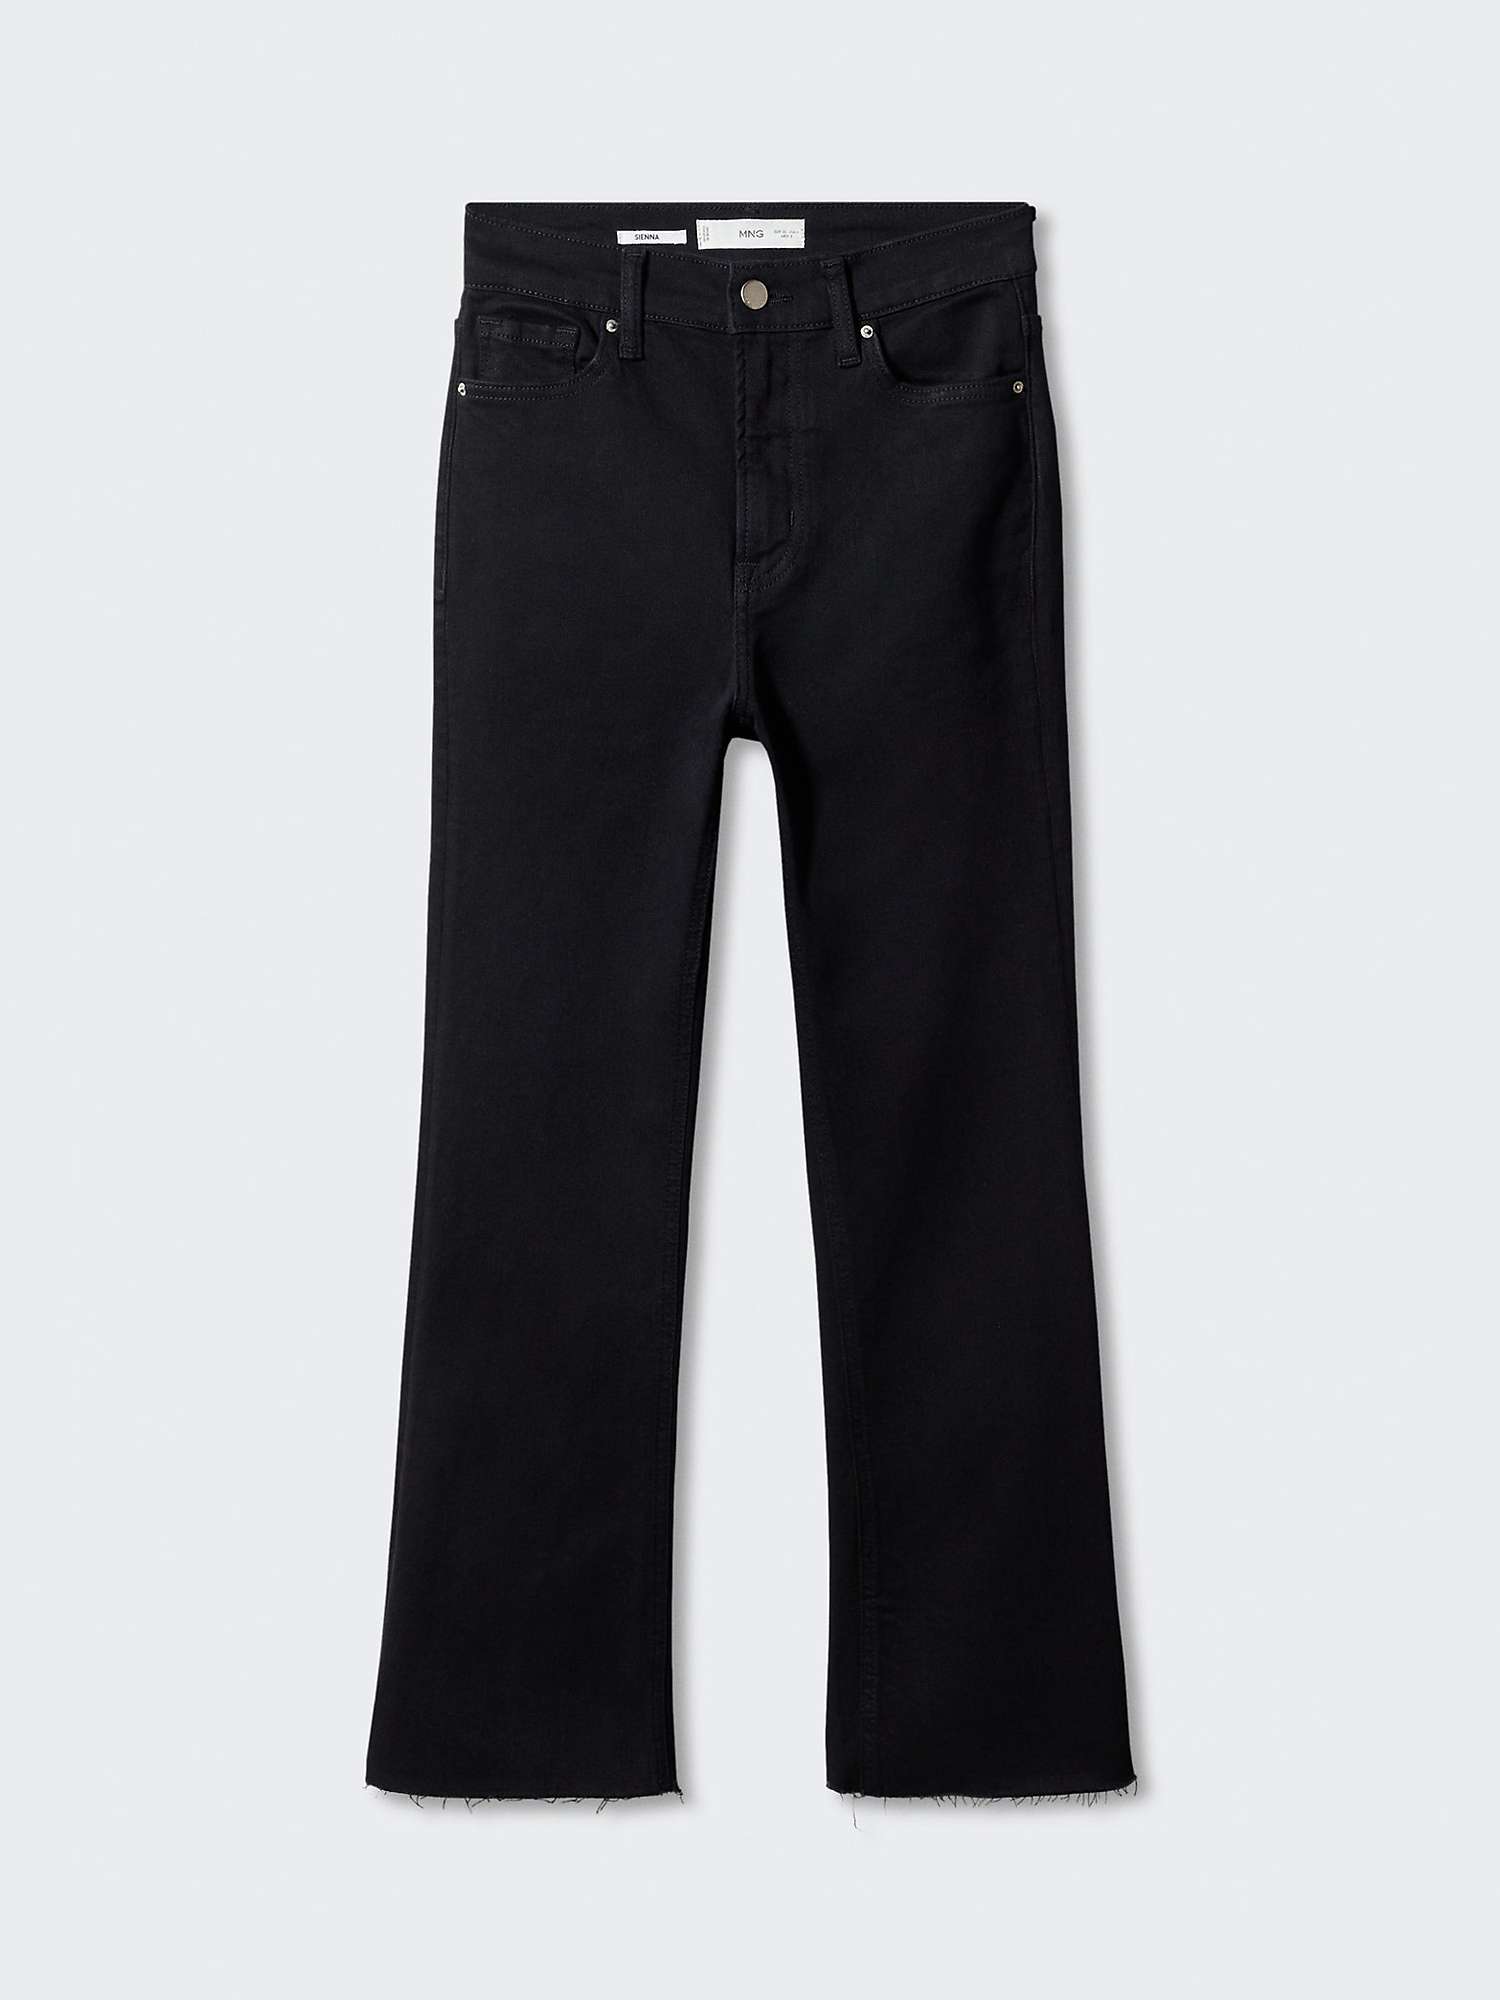 Buy Mango Sienne Cropped Flared Jeans, Open Grey Online at johnlewis.com